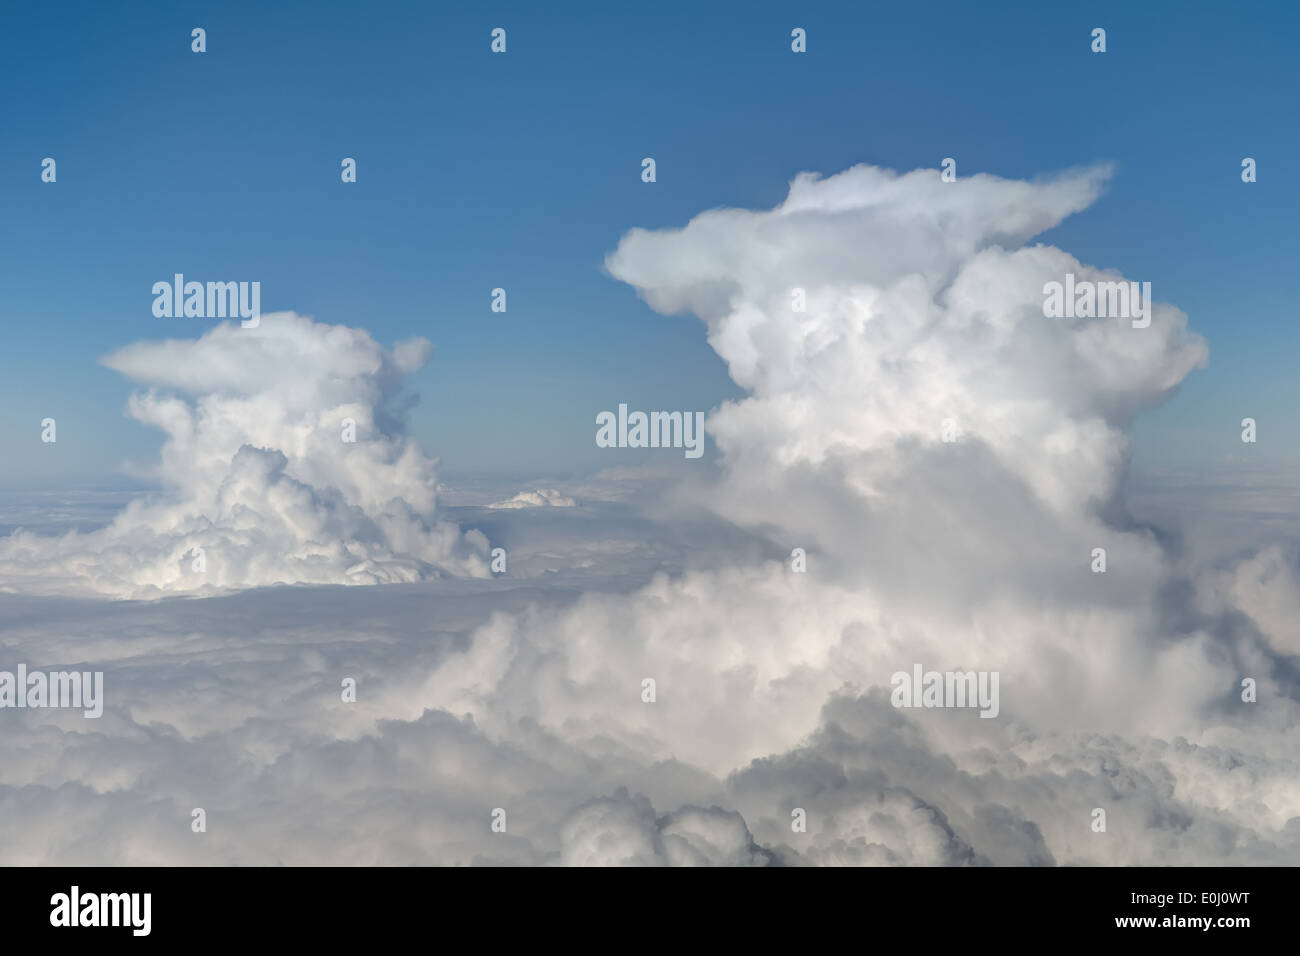 two cumulonimbus clouds on blue sky background Stock Photo